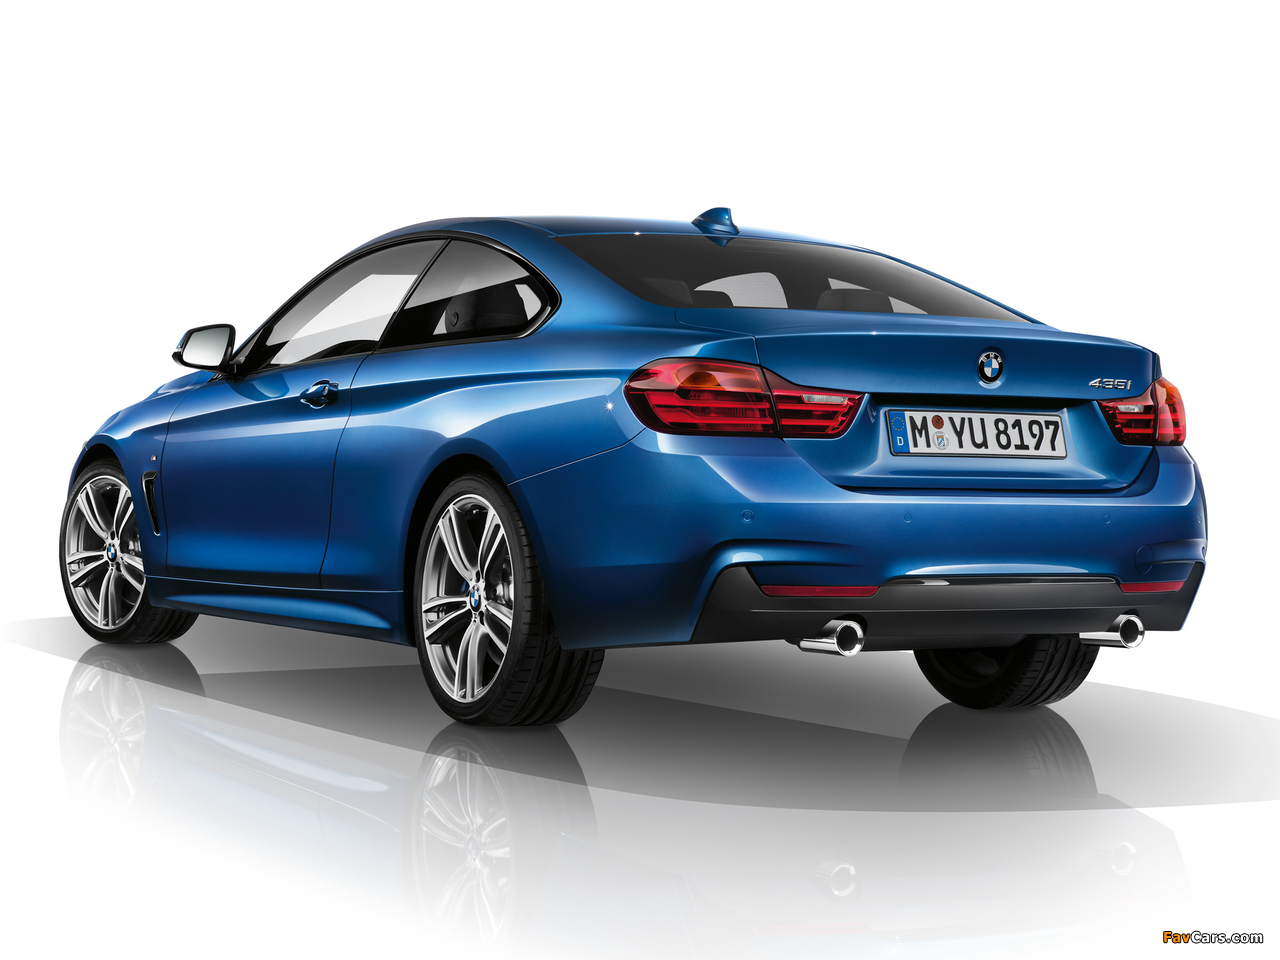 BMW 435i Coupé M Sport Package (F32) 2013 pictures (1280 x 960)